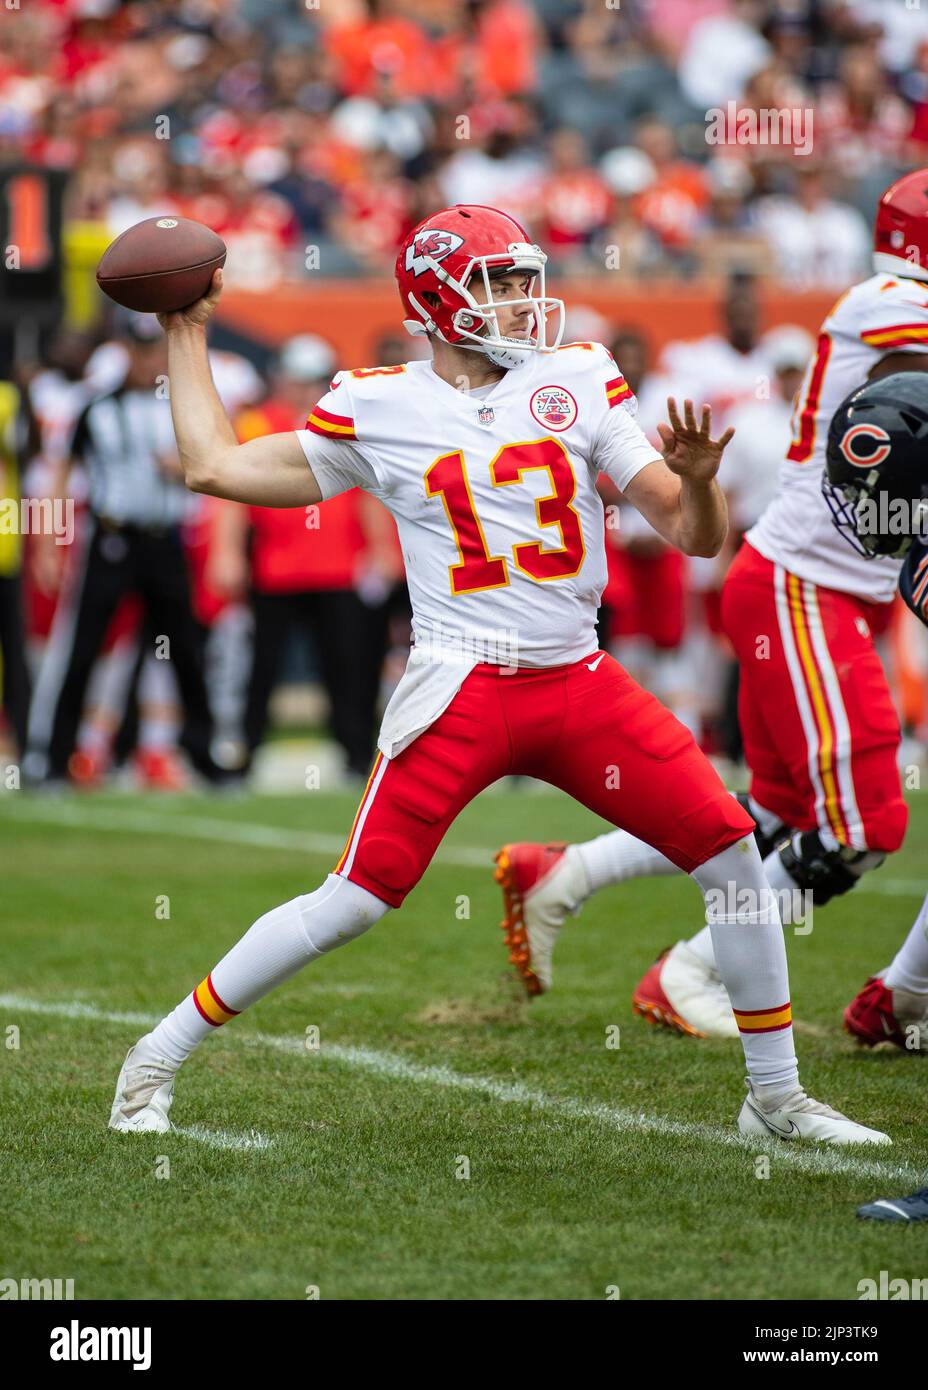 August 13, 2022: Chicago, Illinois, U.S. - Kansas City Chiefs Quarterback #13 Dustin Crum in action during the game between the Kansas City Chiefs and the Chicago Bears at Soldier Field in Chicago, IL. Stock Photo